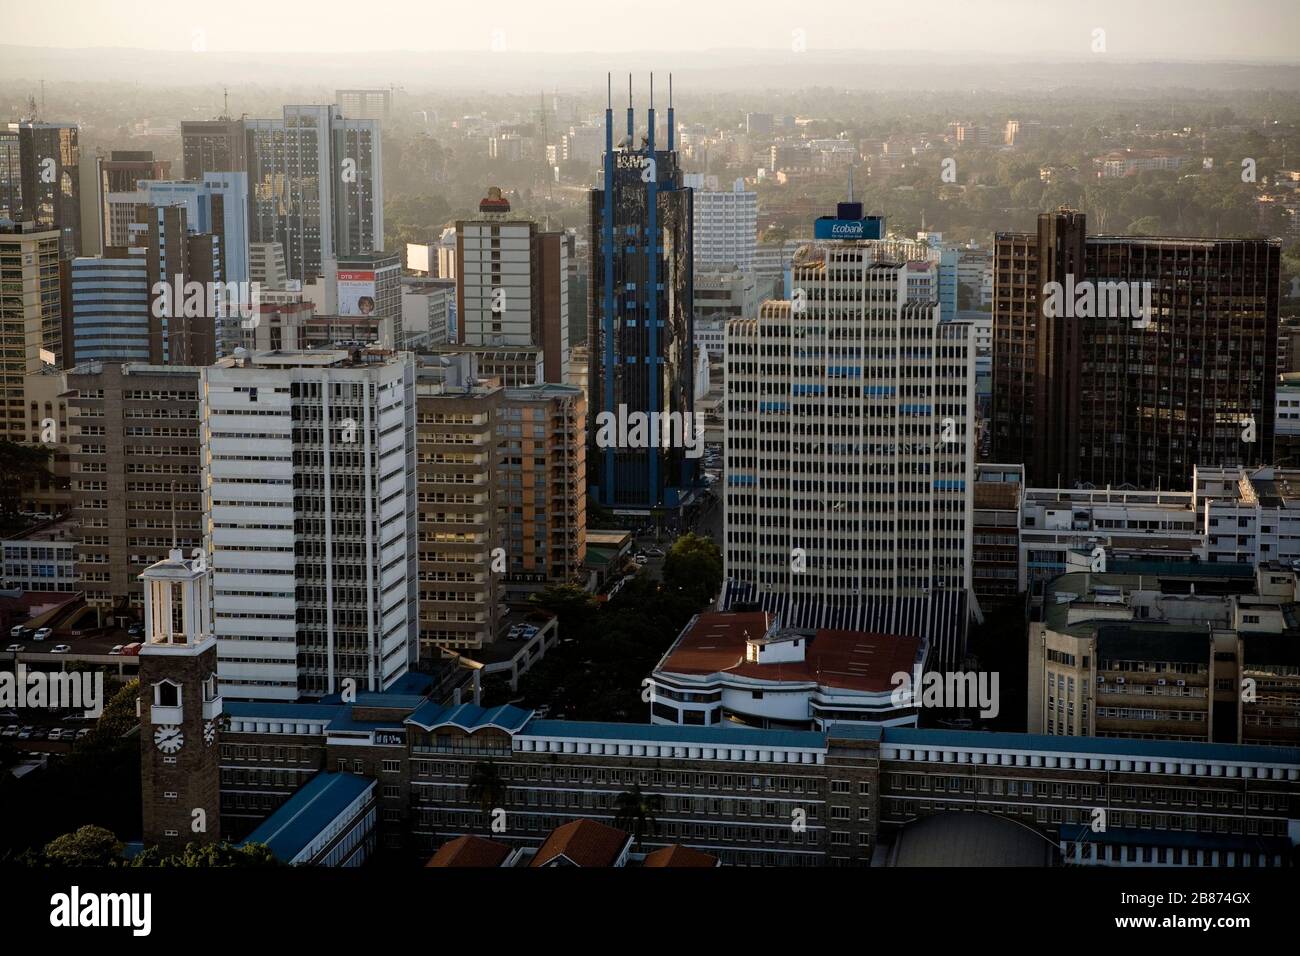 An aerial view shows the Nairobi city centre in Kenya on March 8, 2011. Stock Photo